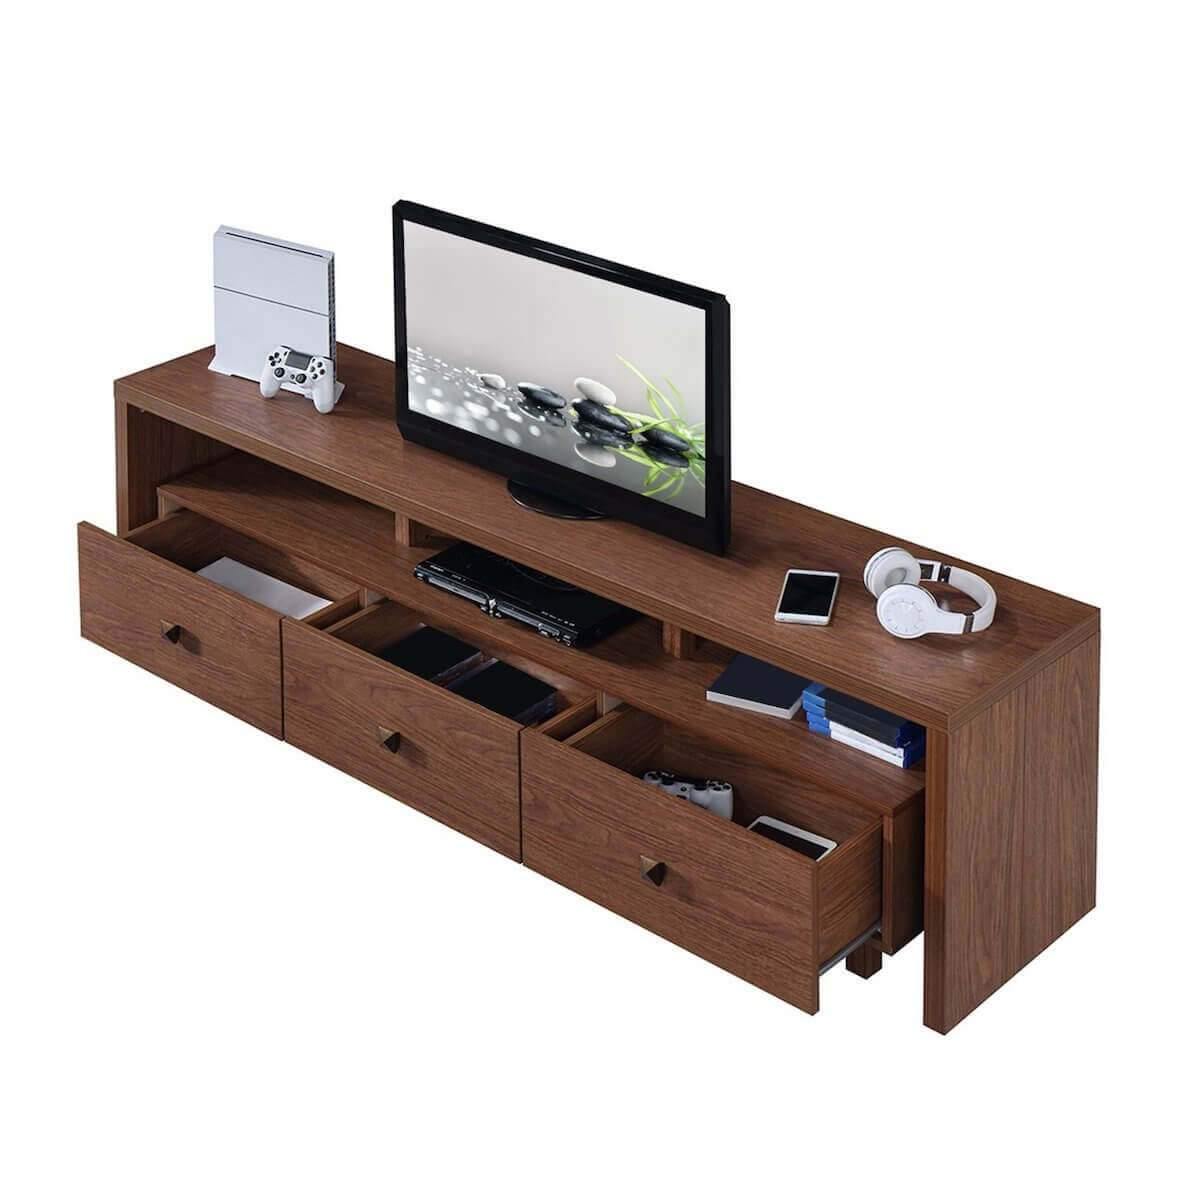 Techni Mobili Hickory Elegant TV Stand for TV's Up To 75" with Storage RTA-8895-HRY with TV